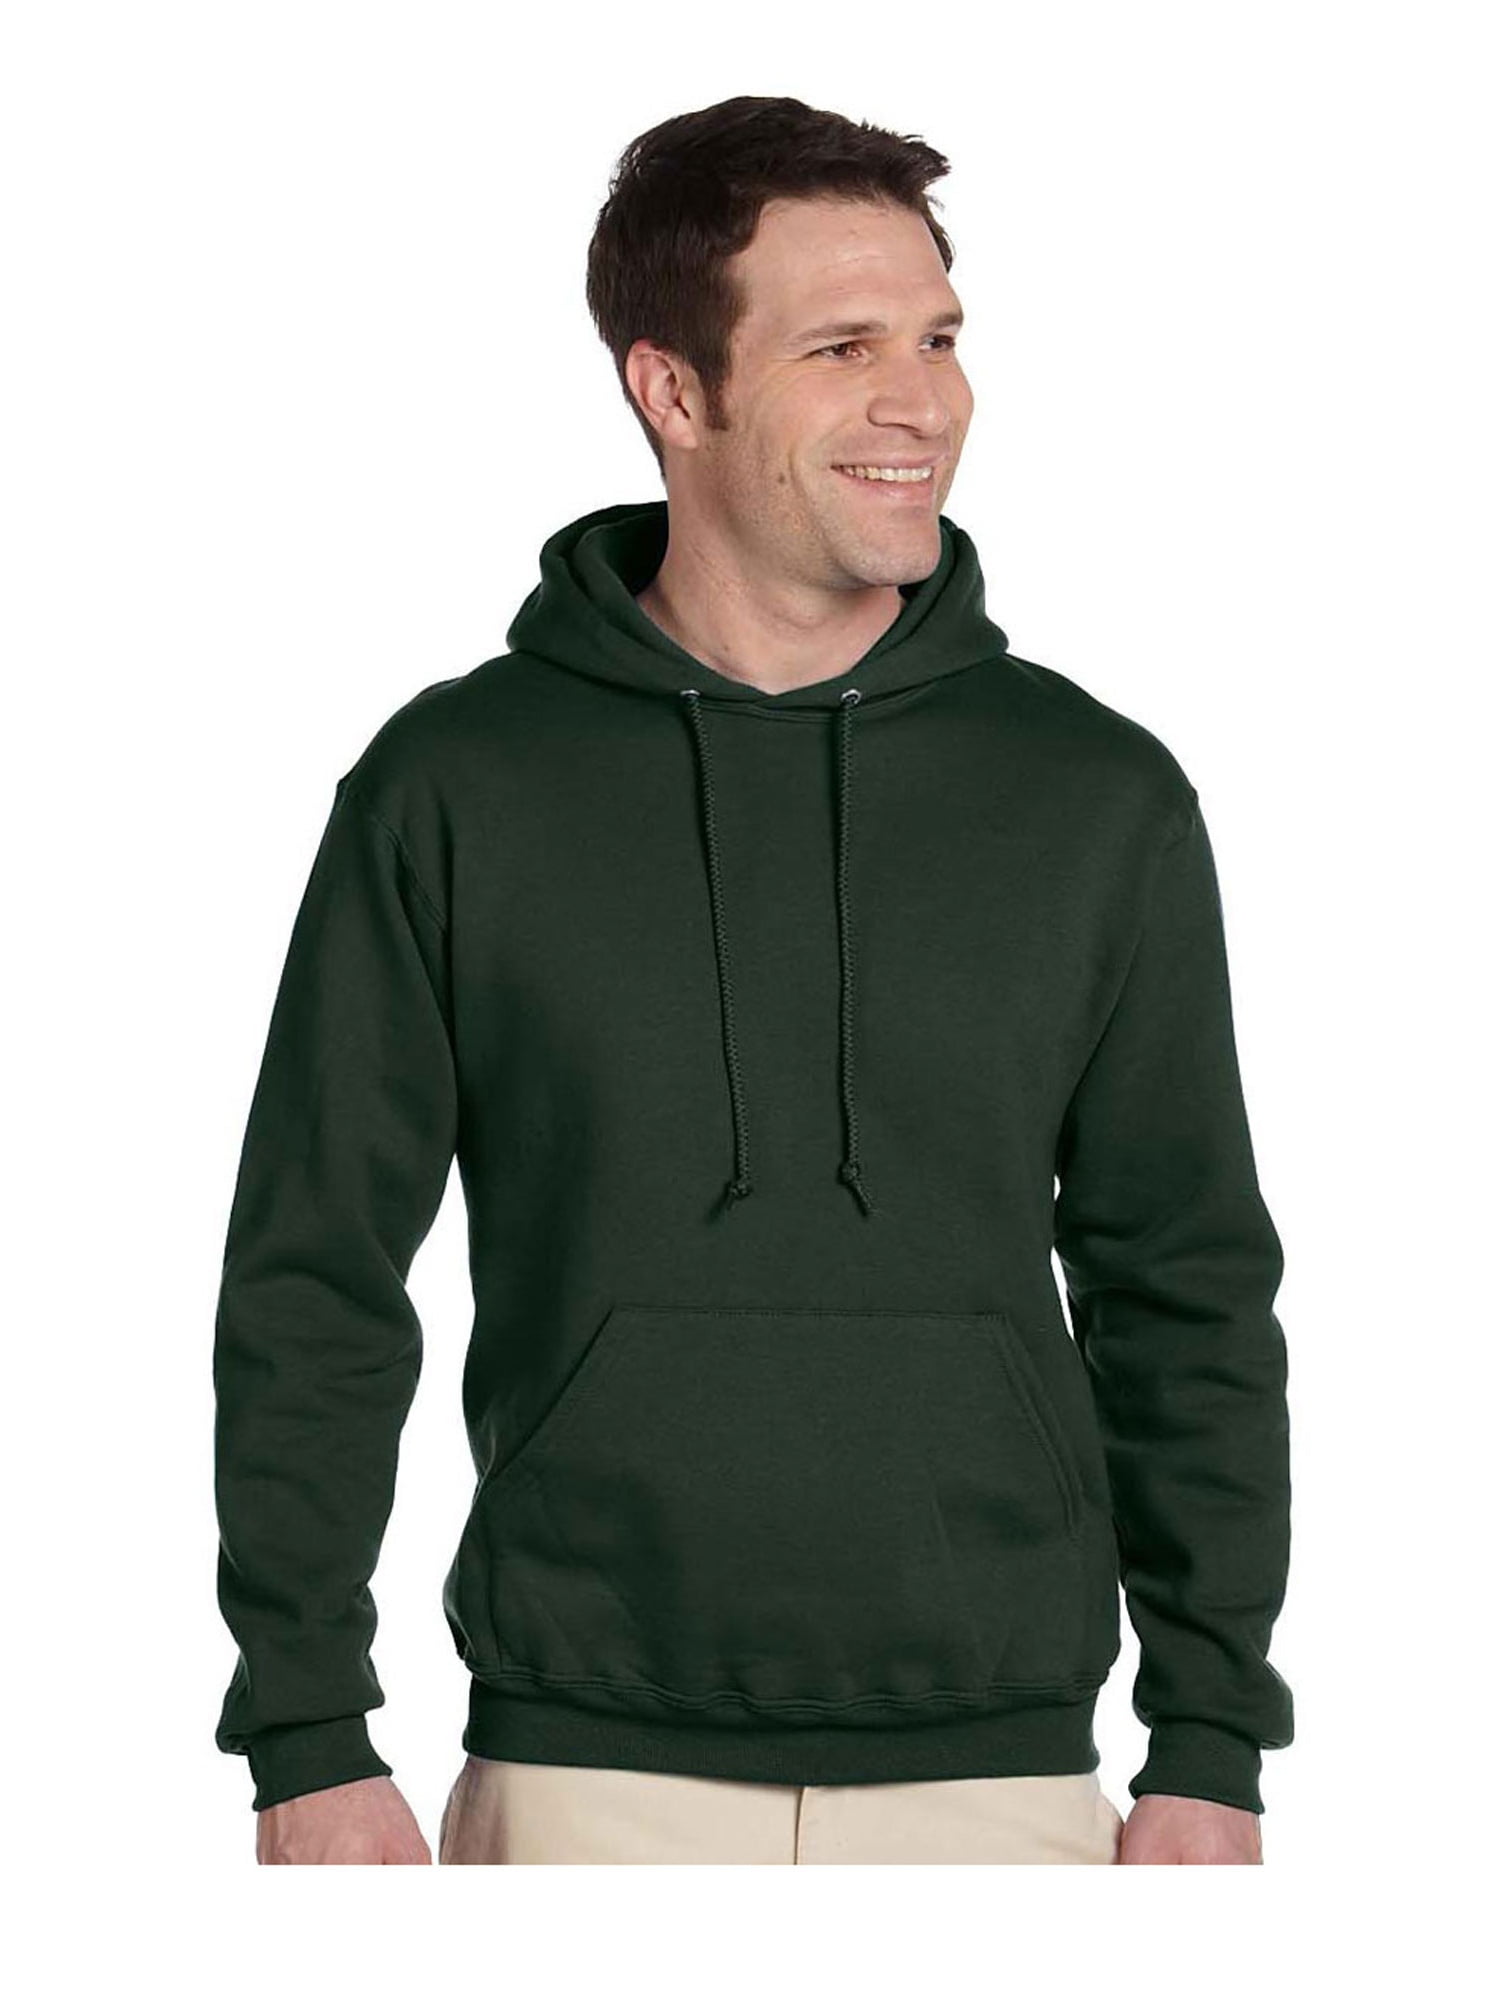 2X-Large, Forest Green Regular and Big & Tall Sizes Mens Soft Crewneck Sweatshirt by Jerzees